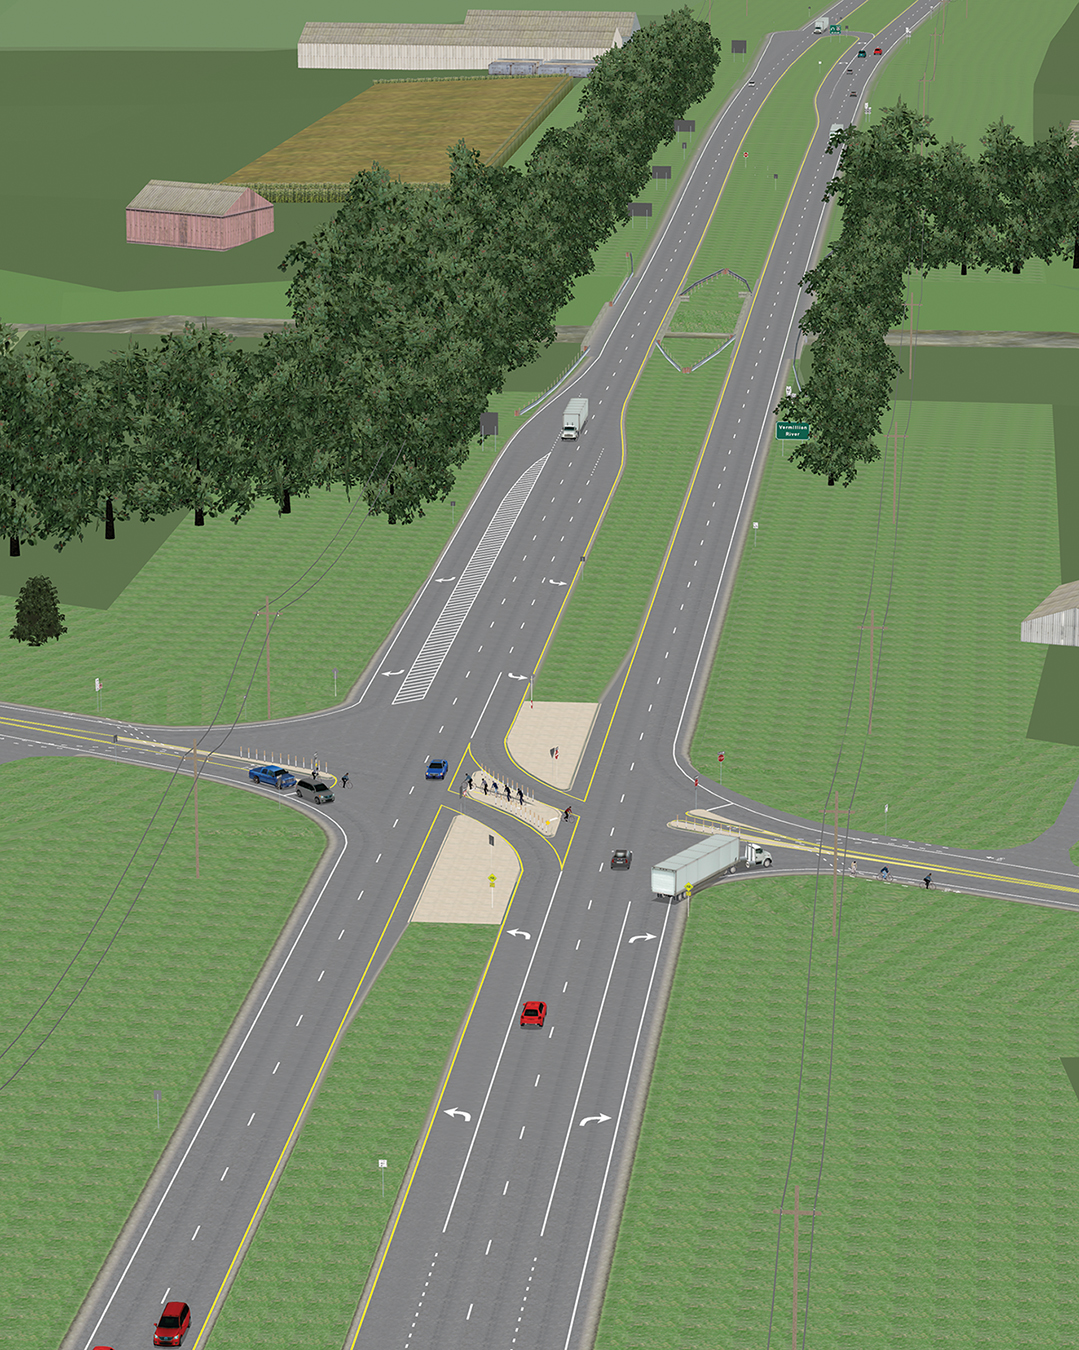 A screen capture of a computer simulation of an intersection. The screen capture provides a birdâ€™s eye view of an intersection, with two lanes of traffic flowing each way. Both directions also have left and right turn lanes and a central median divides the two. Vehicles, including cars and trucks, are shown traveling in both directions as well as entering and leaving the intersection.